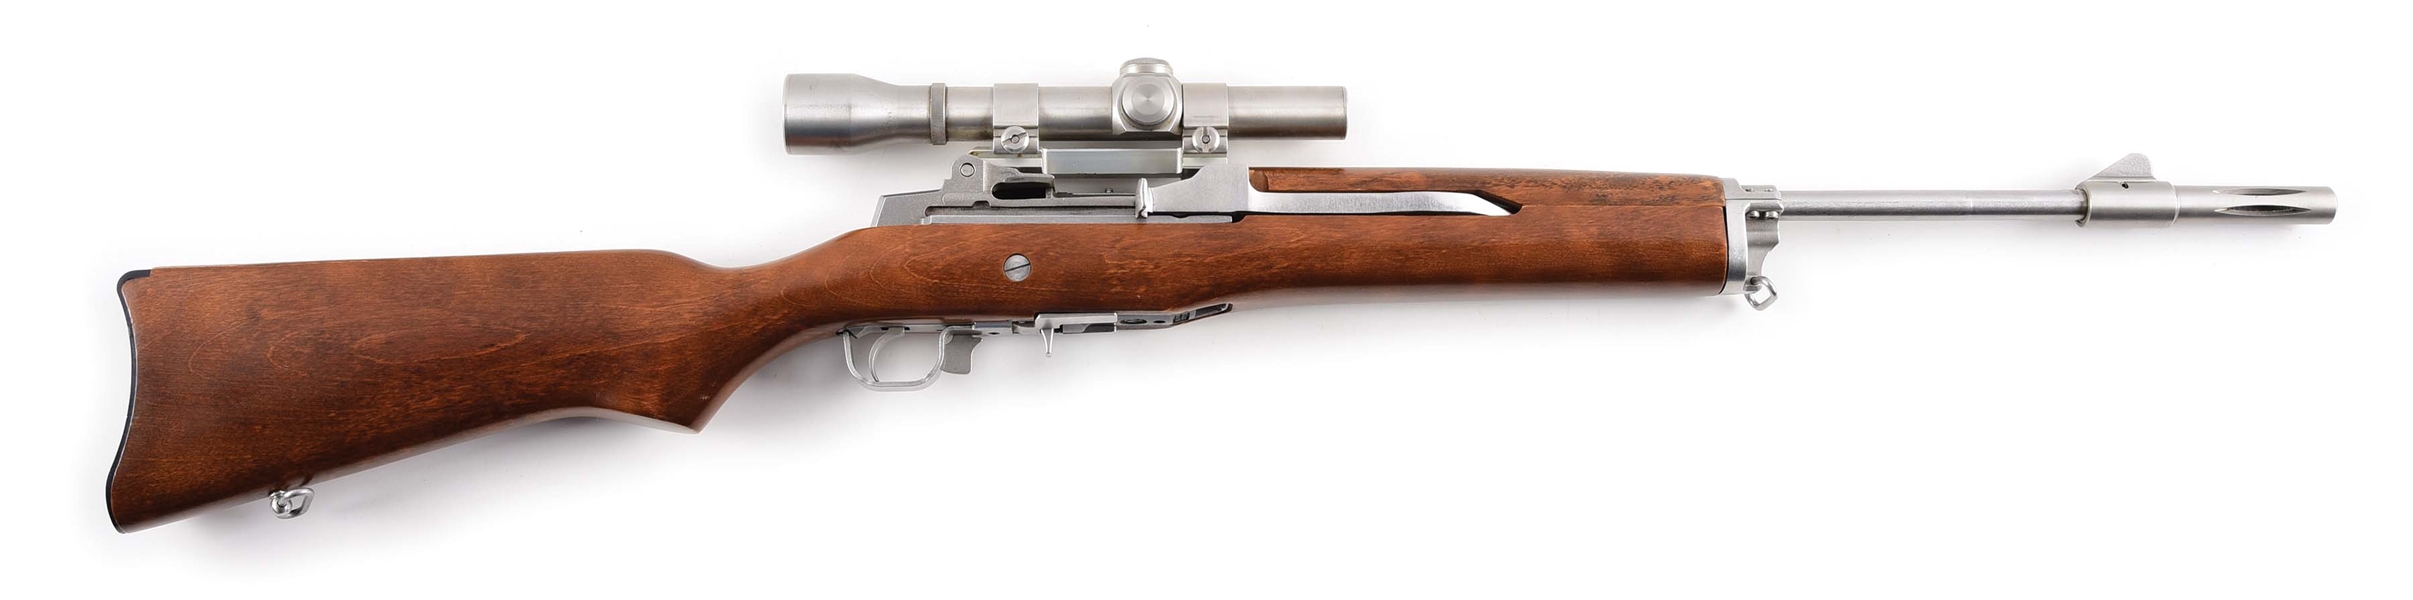 (M) RUGER MINI 14 SEMI-AUTOMATIC RIFLE WITH SCOPE.